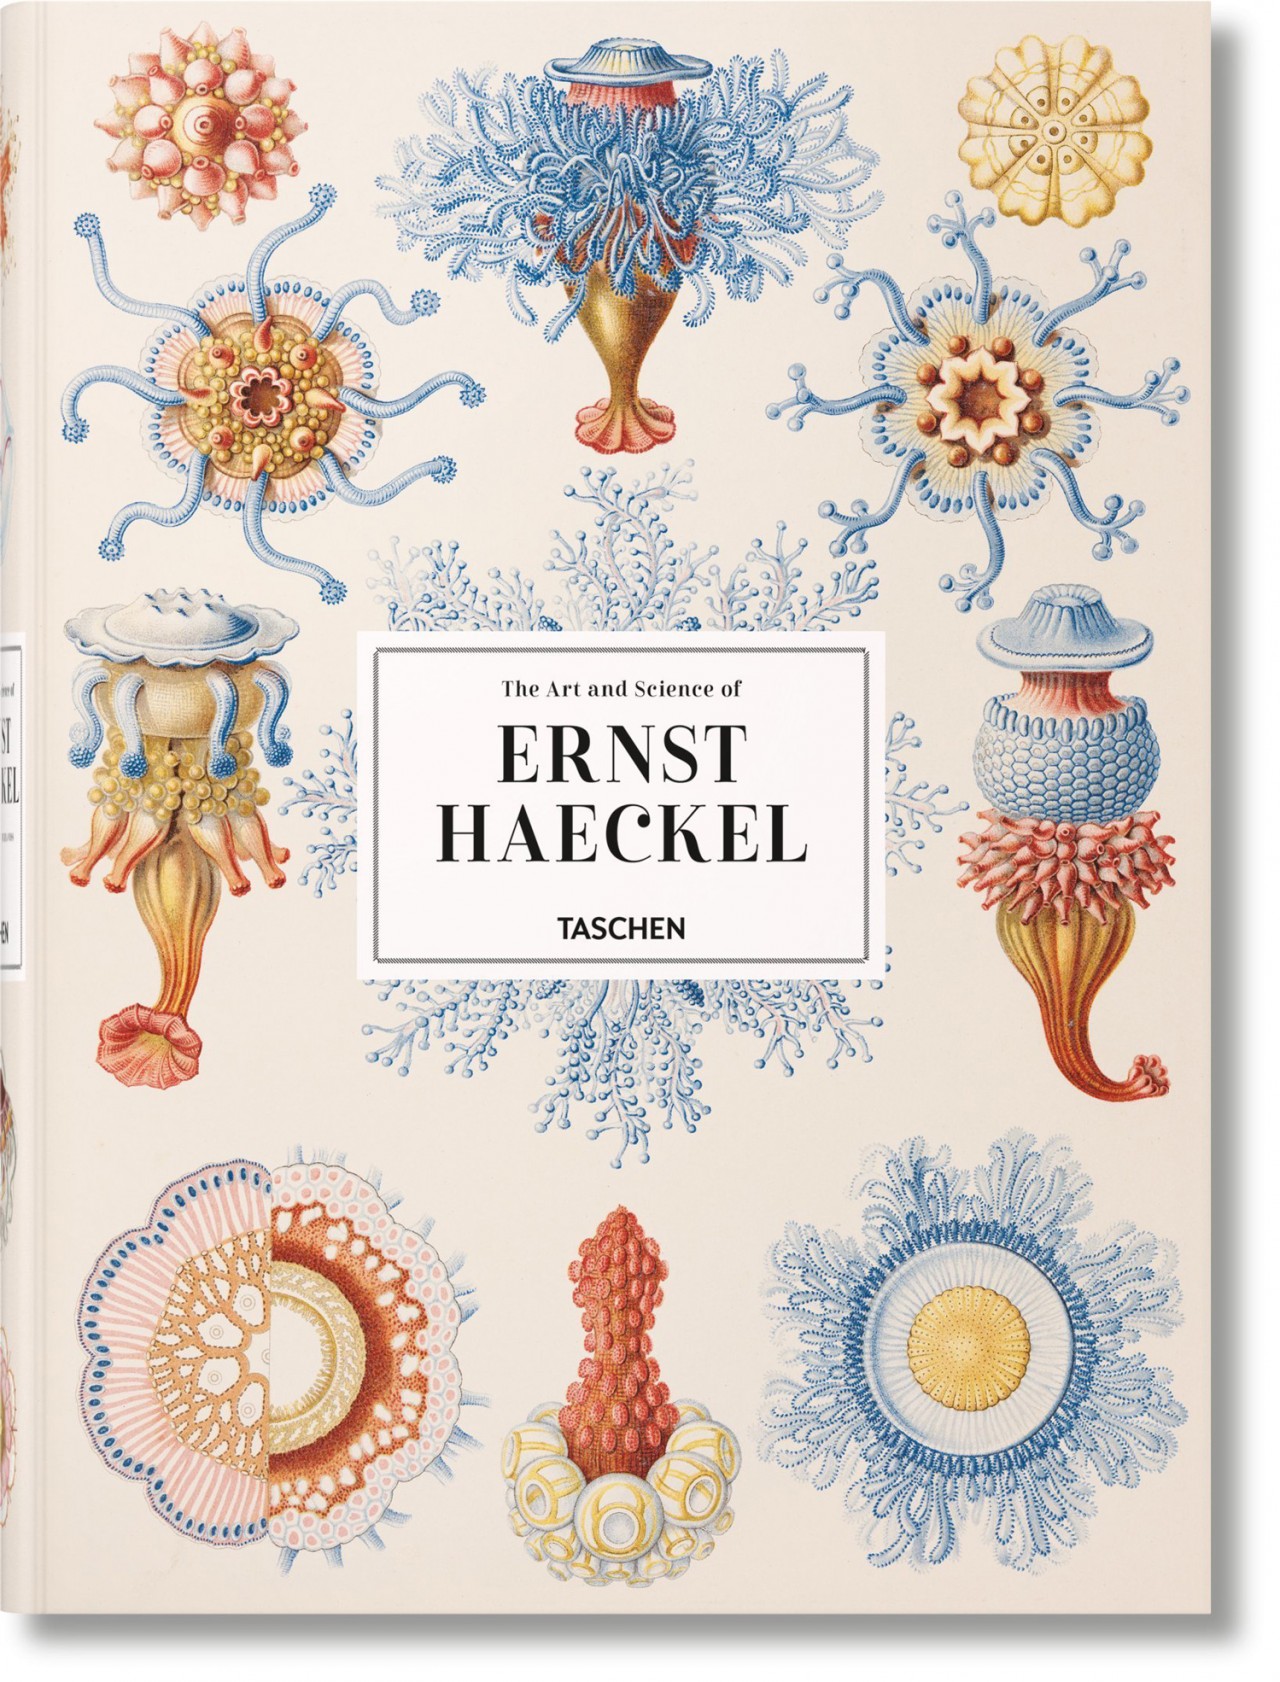 of the Art and Science of Ernest Haeckel